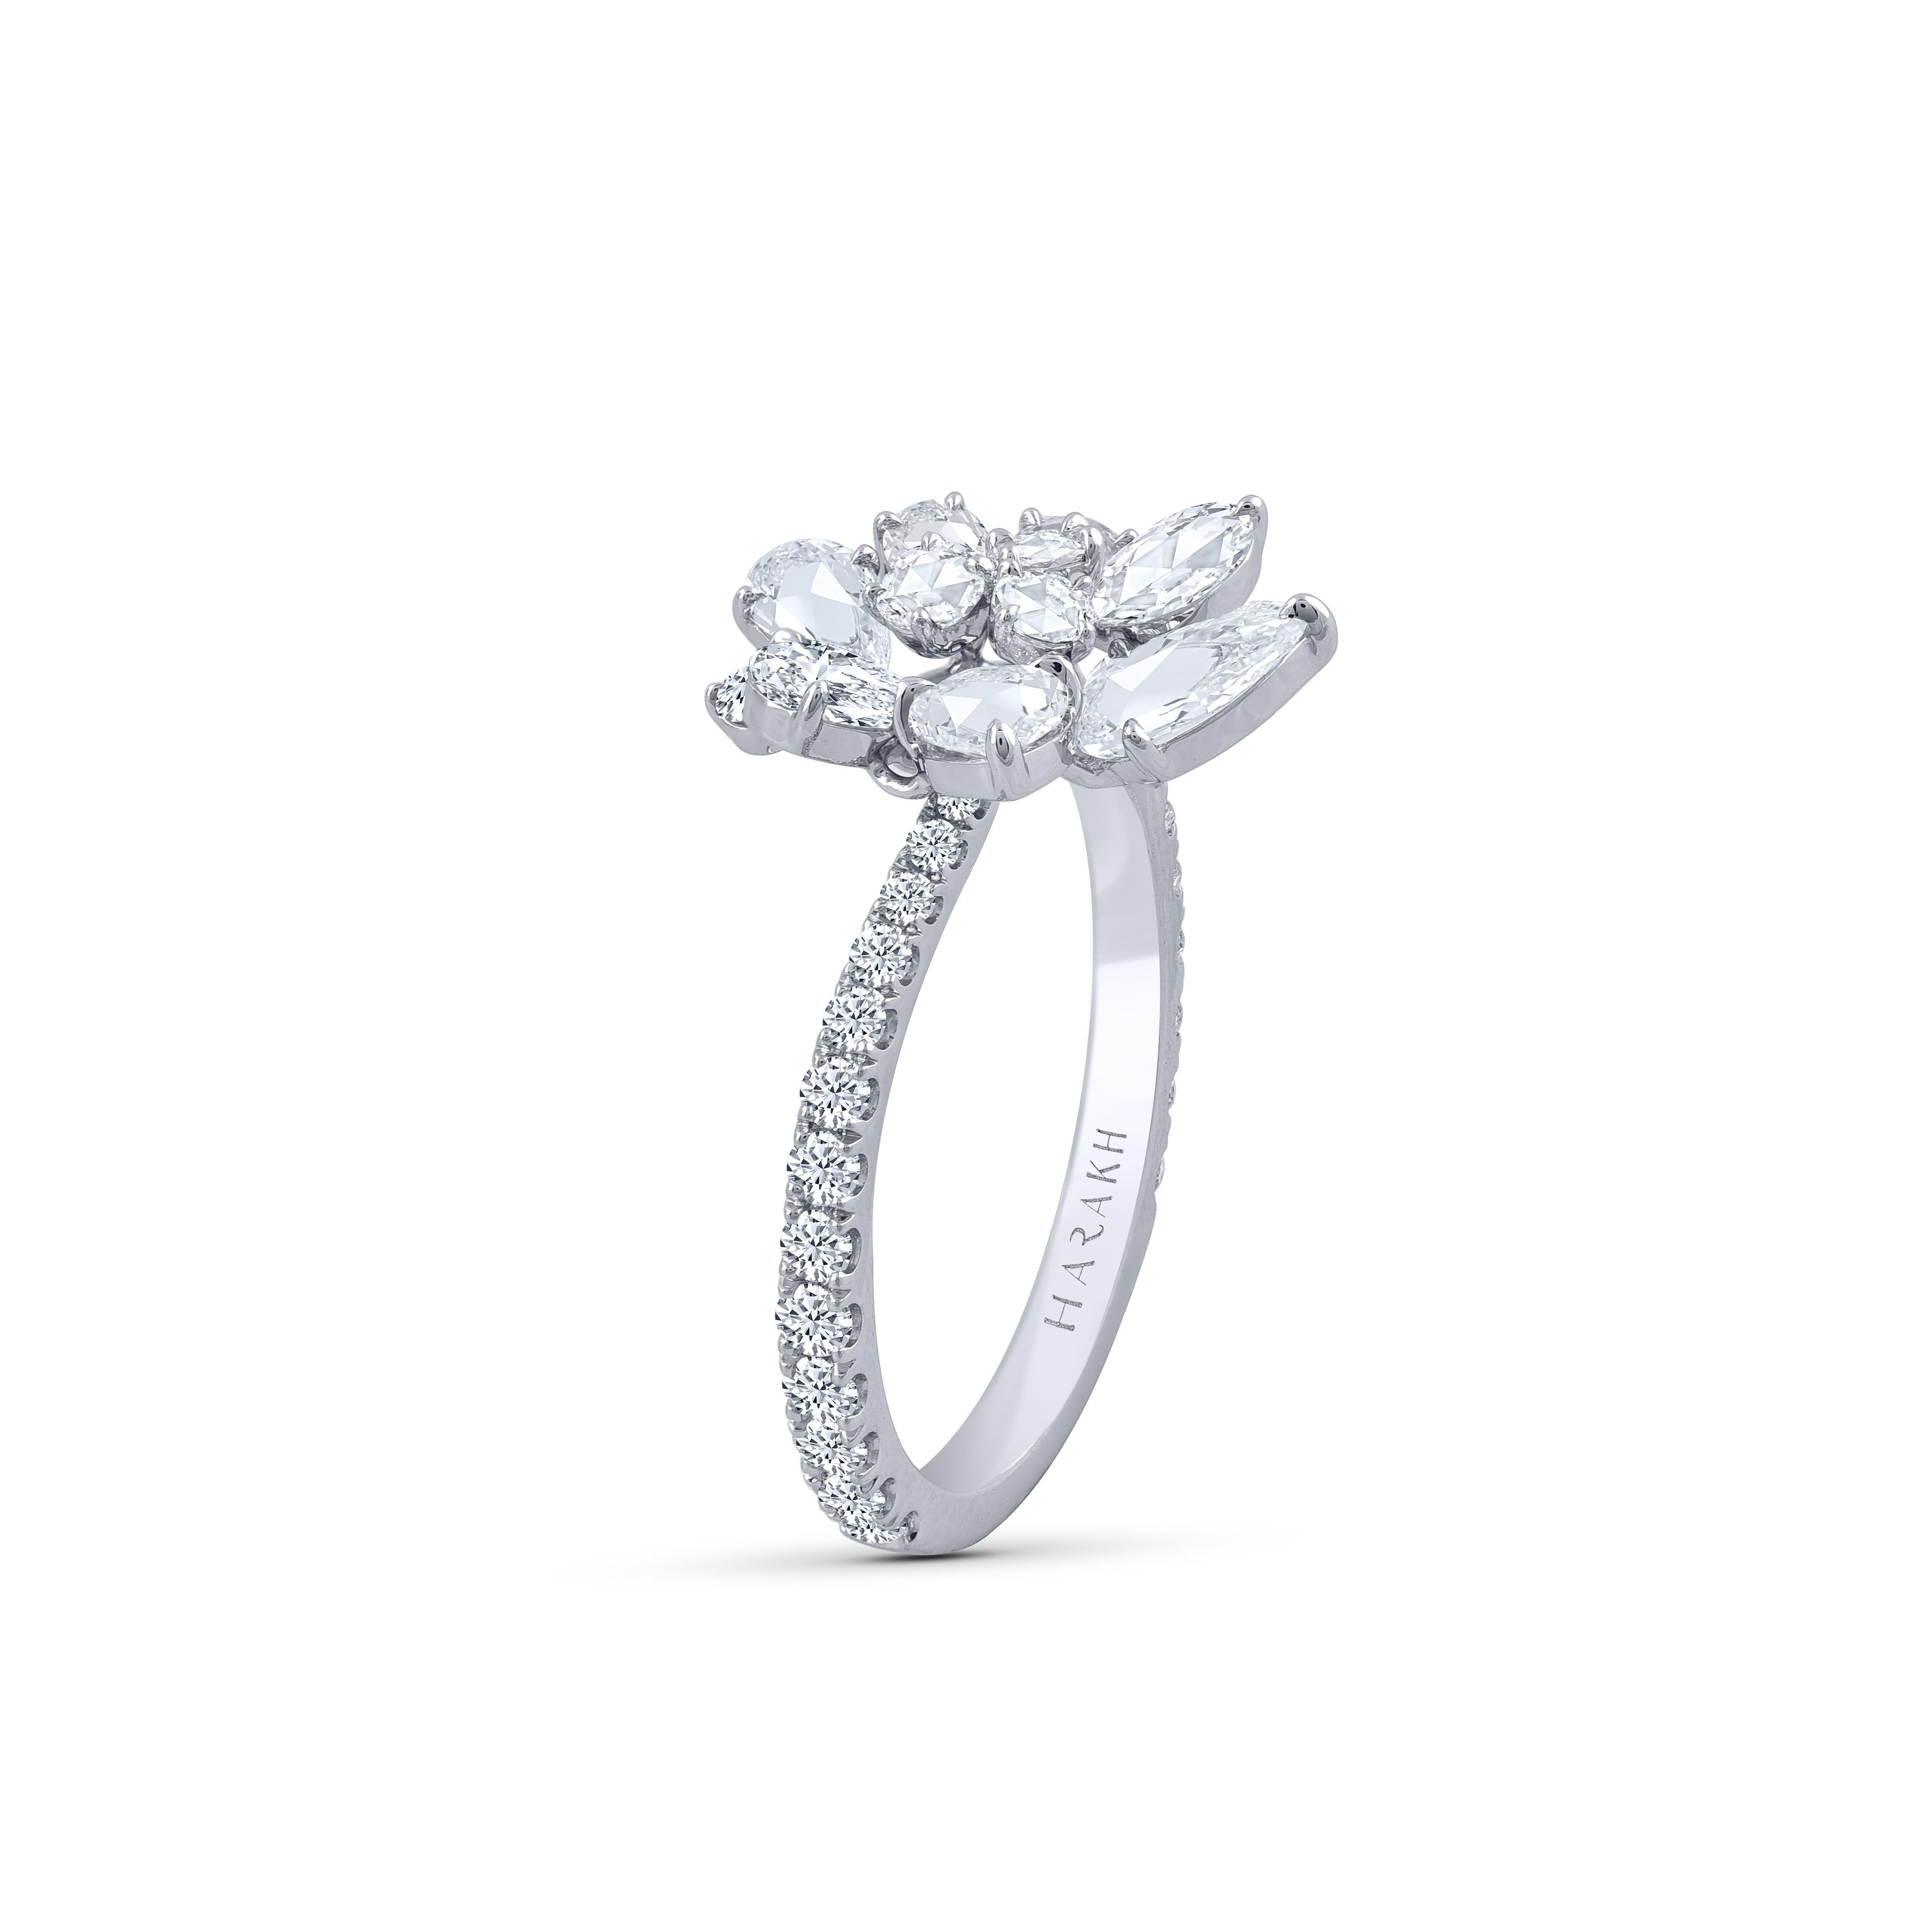 Beautifully designed cluster ring with diamond studded white gold band topped by a cluster of multi stones, meticulously crafted in 18 KT white gold. 

This ring is a part of our Cascade collection, it is studded with a total of 29 D-F color, IF-VS